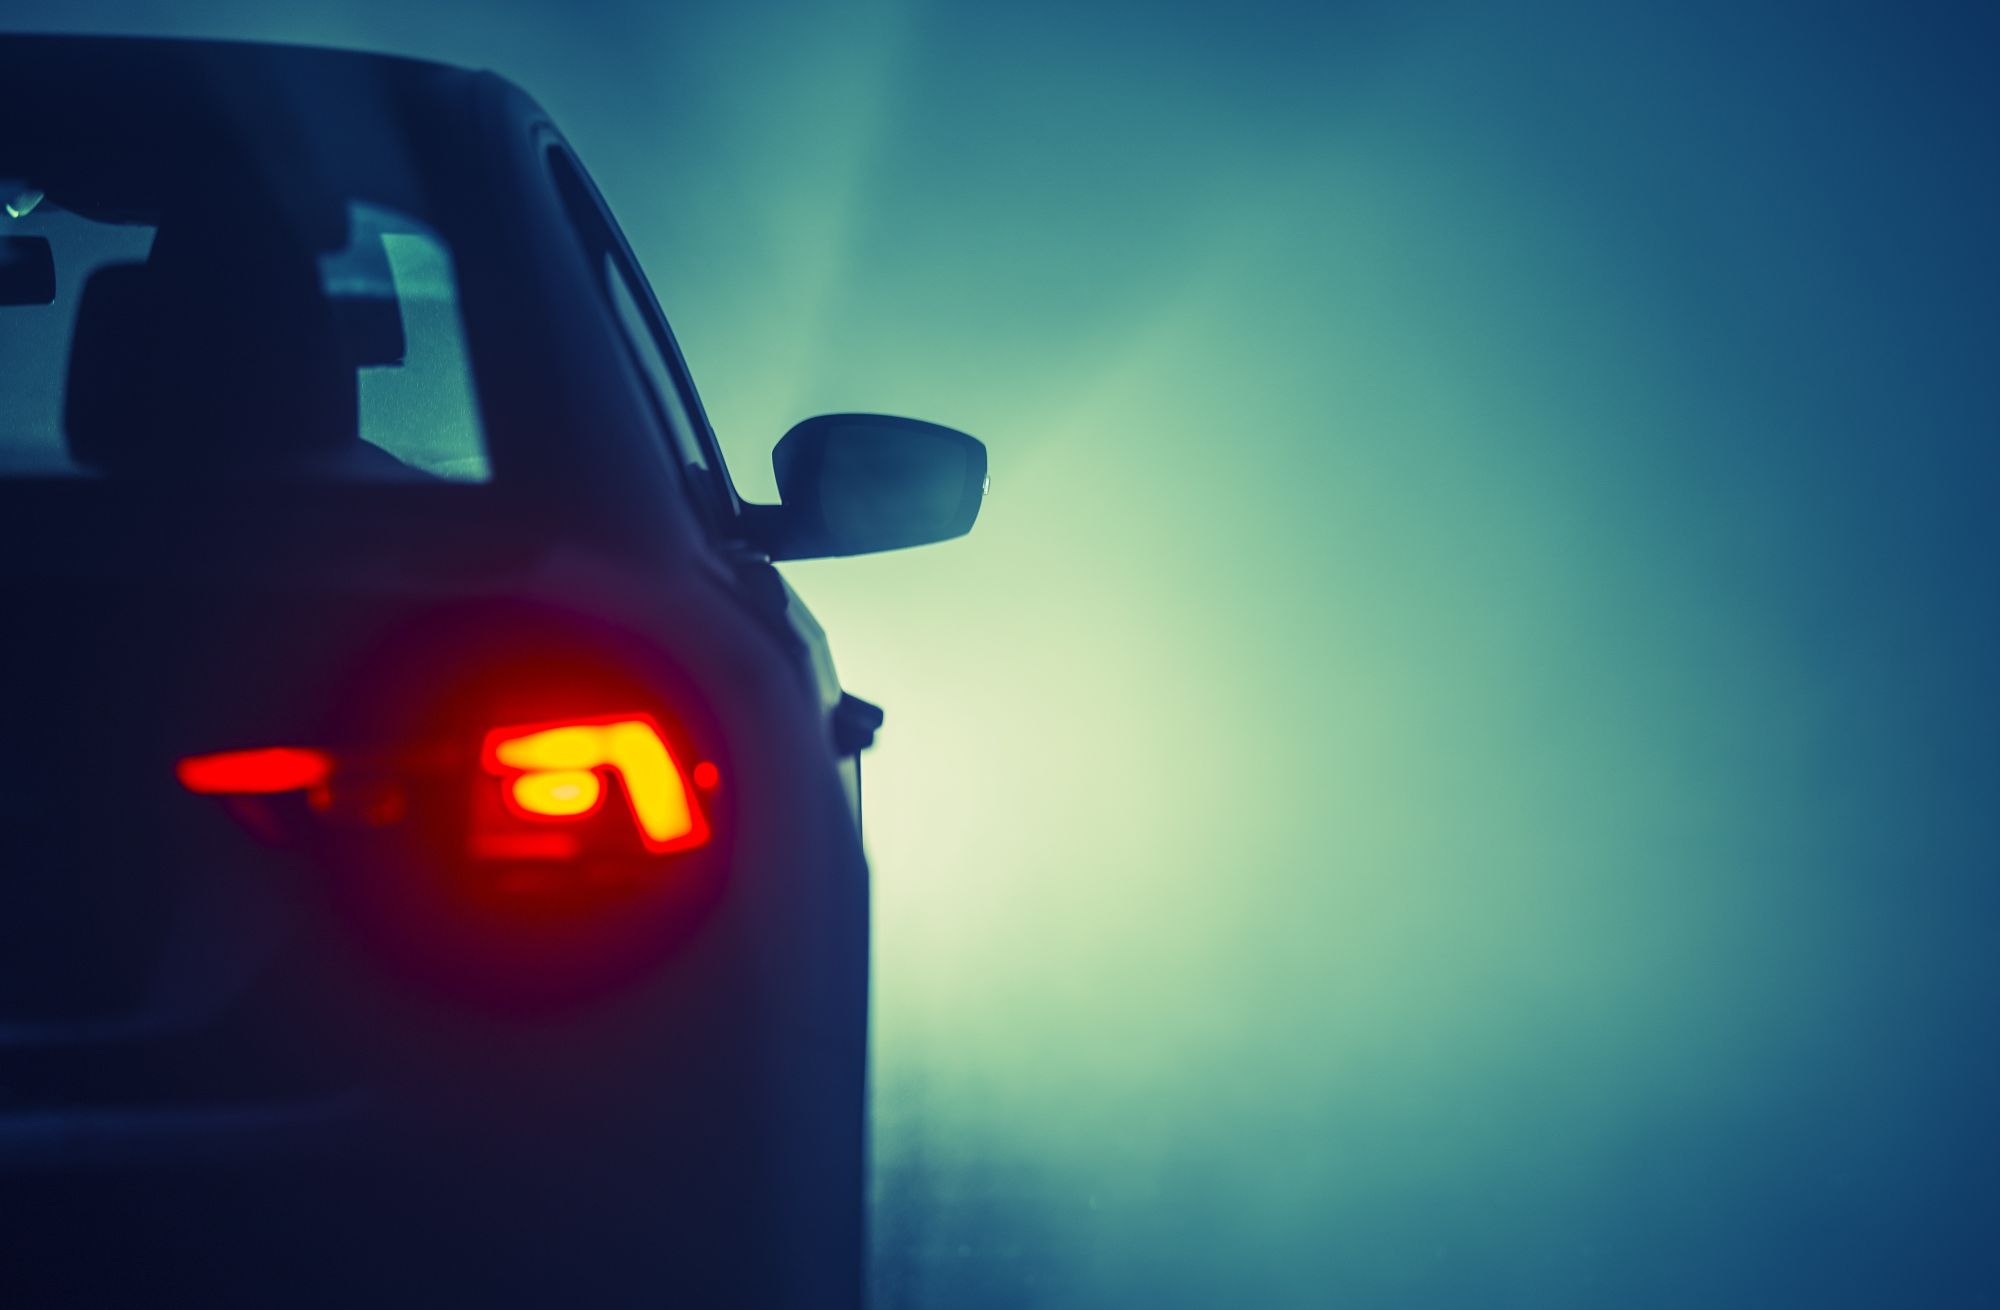 Donâ€™t use rear fog lights. They can make your brake lights hard to see so the drivers behind may not notice that you are actually slowing down until its too late  Just keep your headlights and rear lights on and that way, everyone behind will be able to see when you are braking